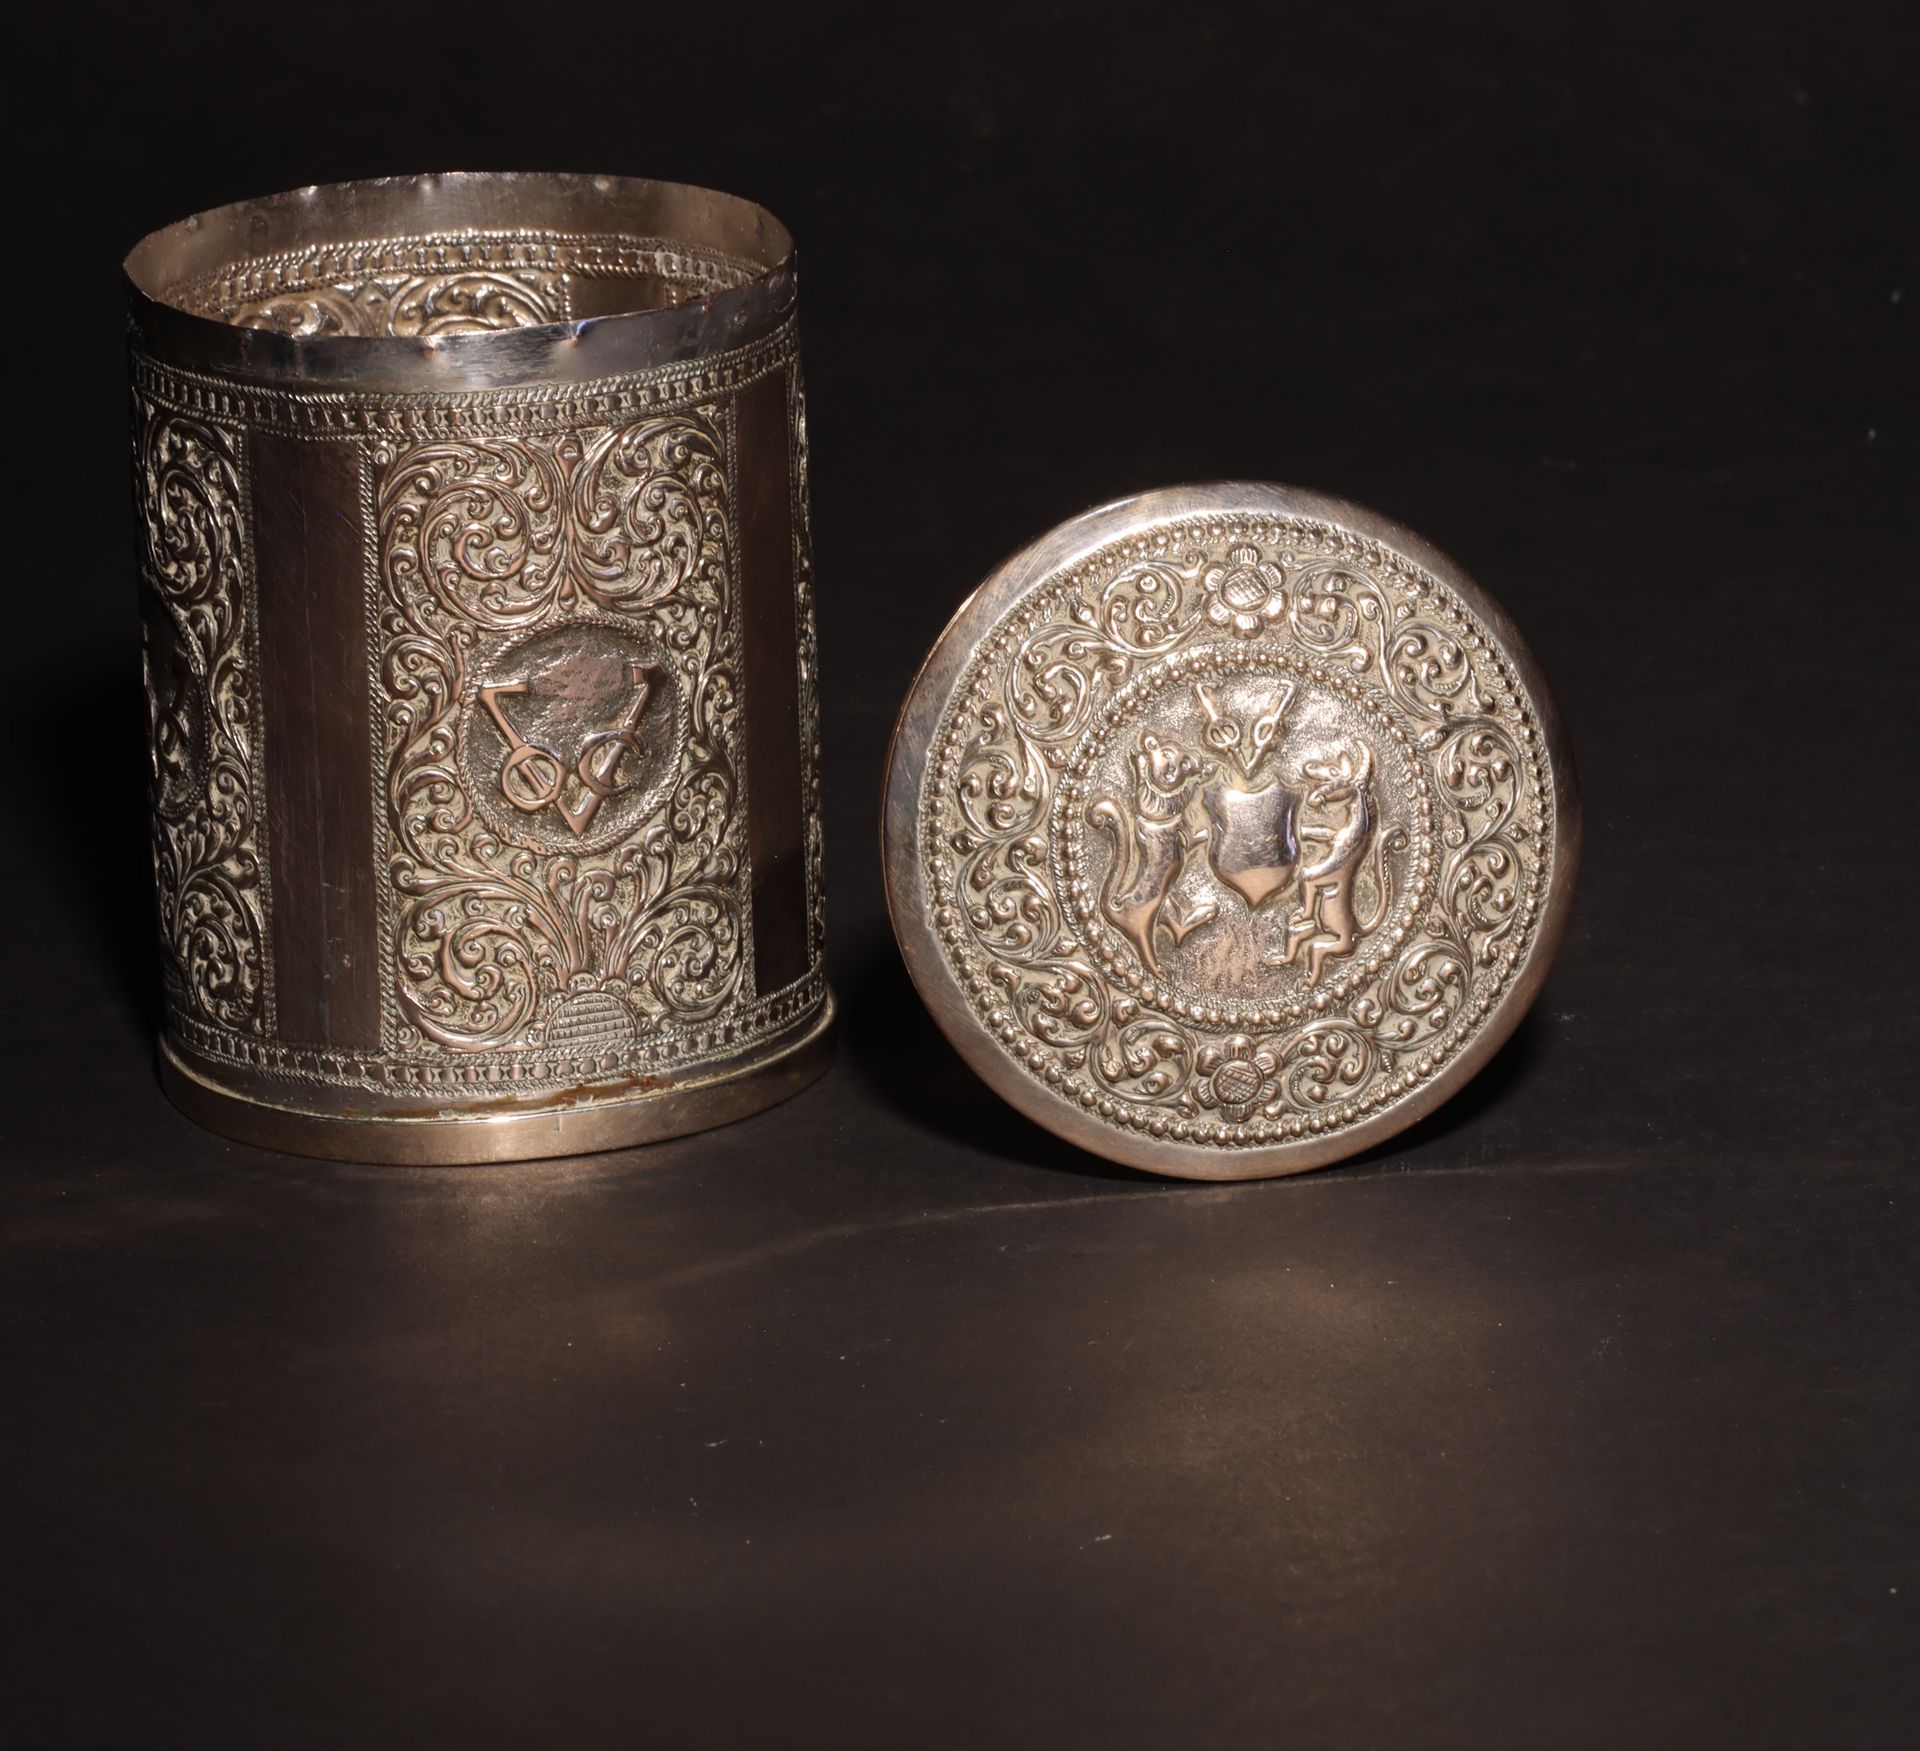 An Antique South Asian Cylindrical Silver Casket with Domed Lid Antiguo cofre ci&hellip;